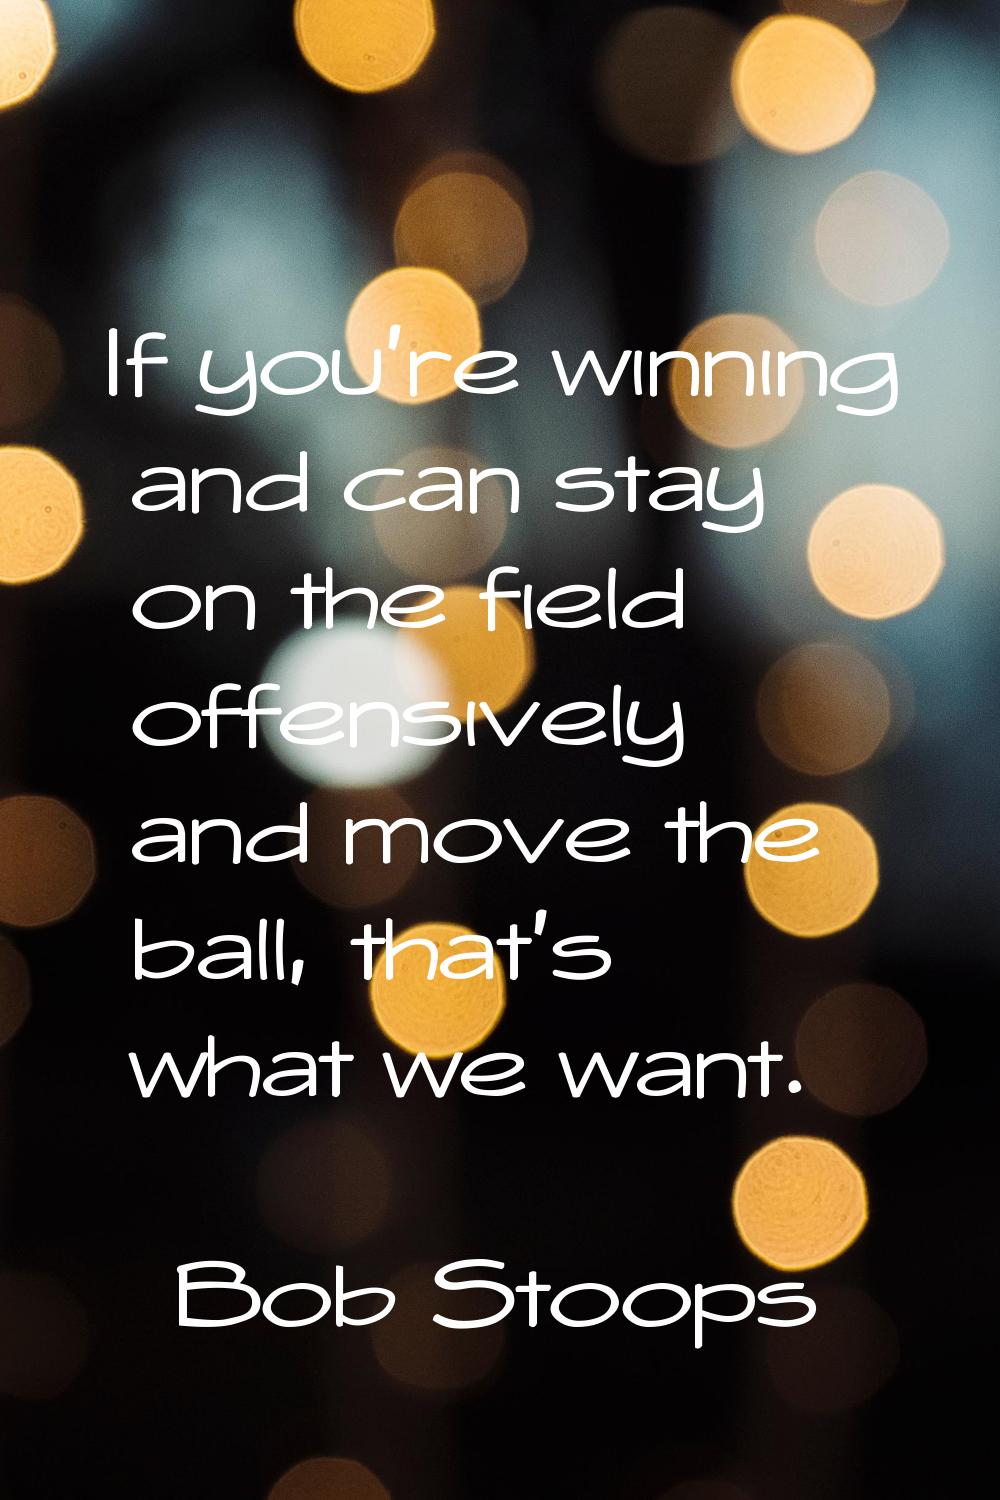 If you're winning and can stay on the field offensively and move the ball, that's what we want.